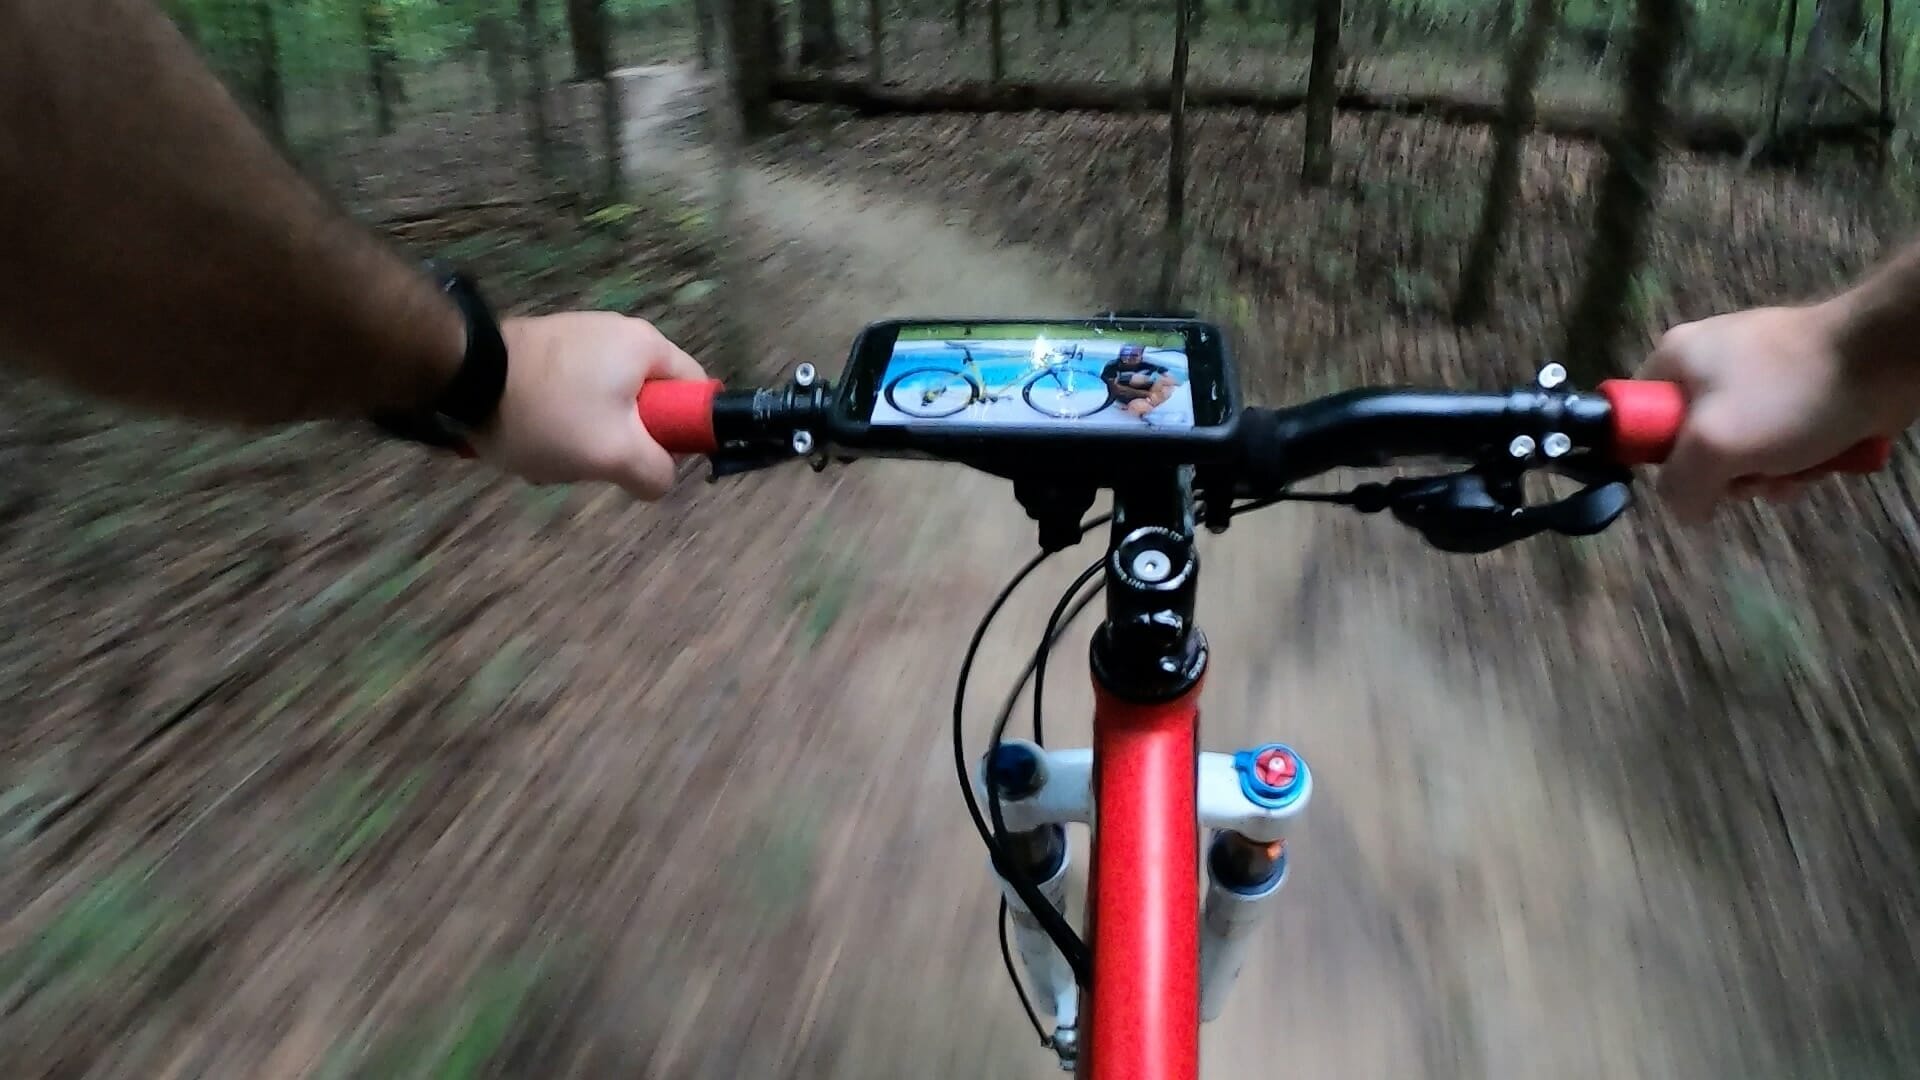 watching YouTube videos while riding the bike thanks to stride charge